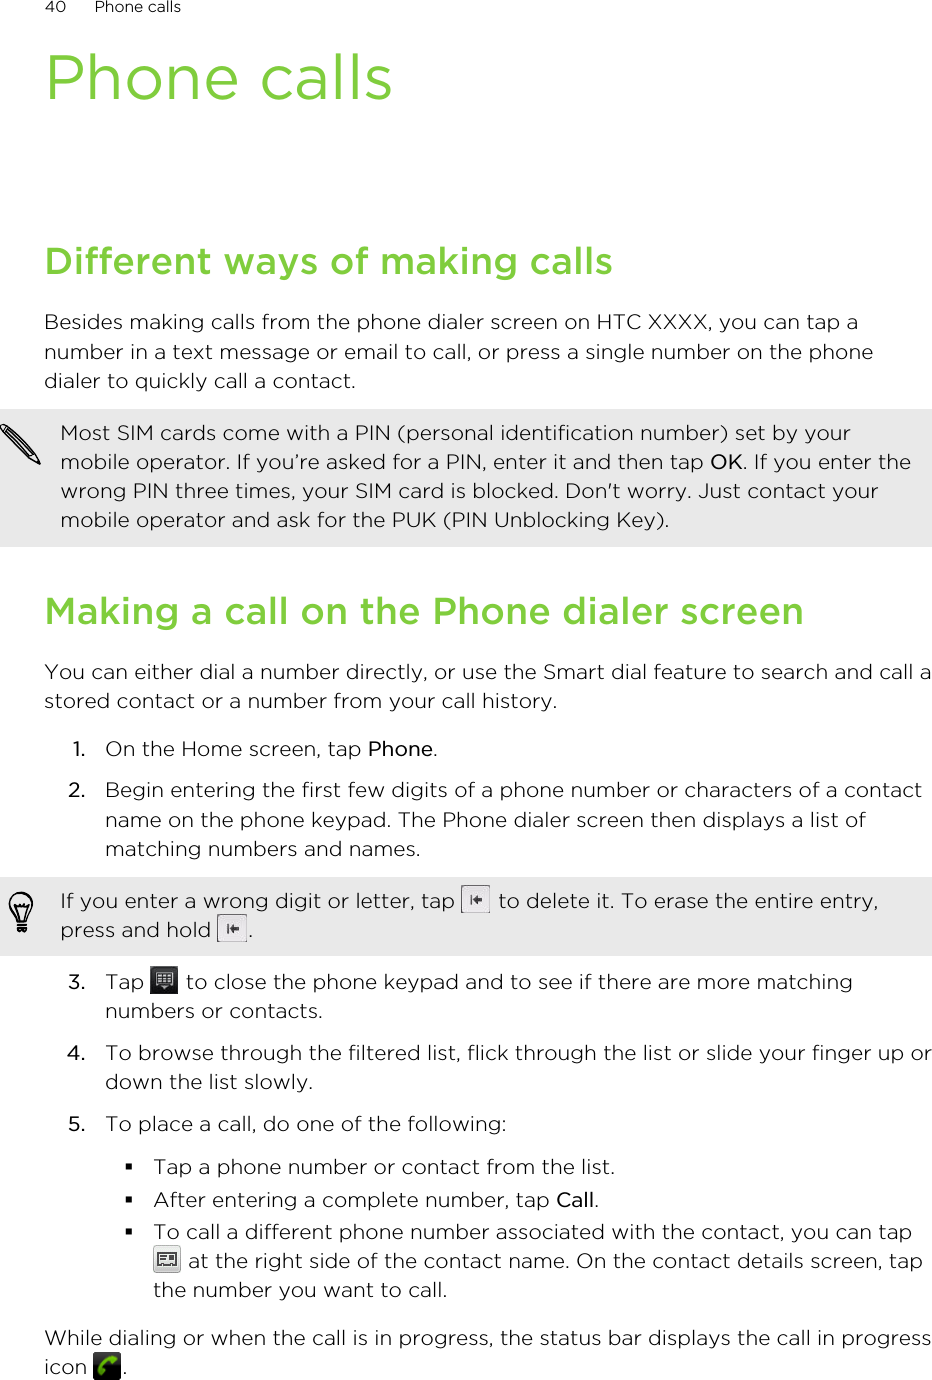 Phone callsDifferent ways of making callsBesides making calls from the phone dialer screen on HTC XXXX, you can tap anumber in a text message or email to call, or press a single number on the phonedialer to quickly call a contact.Most SIM cards come with a PIN (personal identification number) set by yourmobile operator. If you’re asked for a PIN, enter it and then tap OK. If you enter thewrong PIN three times, your SIM card is blocked. Don&apos;t worry. Just contact yourmobile operator and ask for the PUK (PIN Unblocking Key).Making a call on the Phone dialer screenYou can either dial a number directly, or use the Smart dial feature to search and call astored contact or a number from your call history.1. On the Home screen, tap Phone.2. Begin entering the first few digits of a phone number or characters of a contactname on the phone keypad. The Phone dialer screen then displays a list ofmatching numbers and names.If you enter a wrong digit or letter, tap   to delete it. To erase the entire entry,press and hold  .3. Tap   to close the phone keypad and to see if there are more matchingnumbers or contacts.4. To browse through the filtered list, flick through the list or slide your finger up ordown the list slowly.5. To place a call, do one of the following:§Tap a phone number or contact from the list.§After entering a complete number, tap Call.§To call a different phone number associated with the contact, you can tap at the right side of the contact name. On the contact details screen, tapthe number you want to call.While dialing or when the call is in progress, the status bar displays the call in progressicon  .40 Phone calls